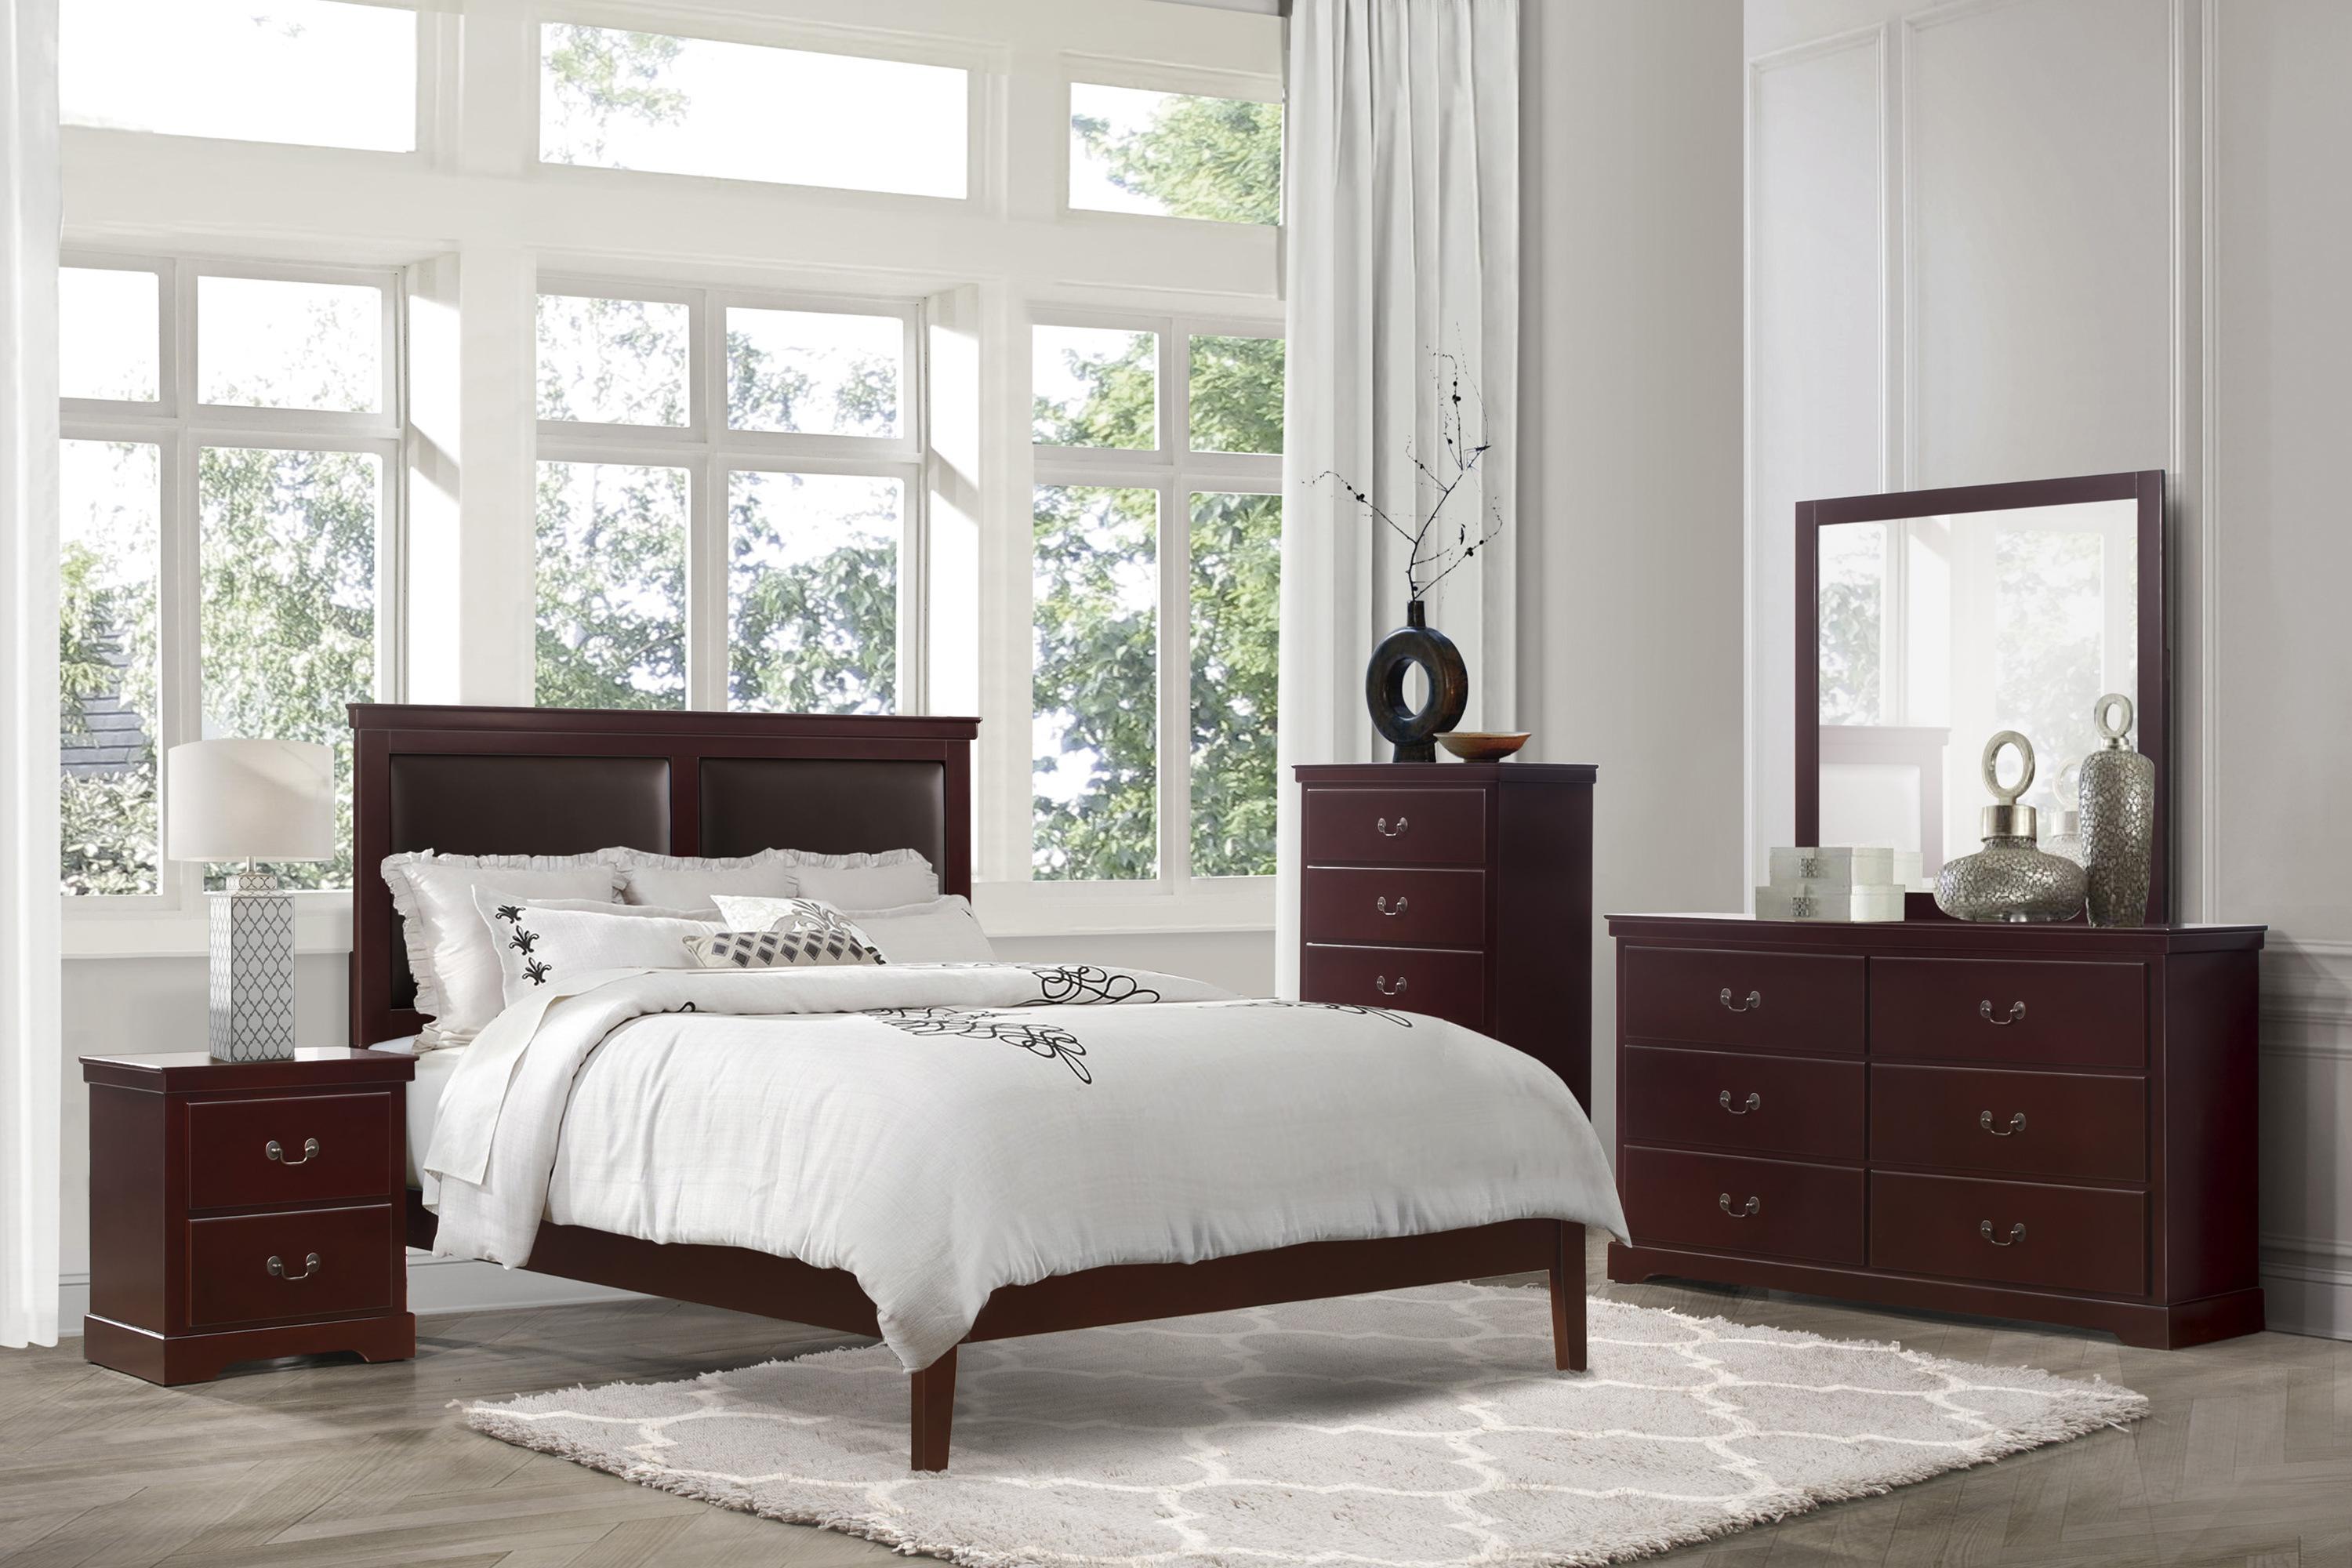 Modern Bedroom Set 1519CHK-1CK-6PC Seabright 1519CHK-1CK-6PC in Cherry Faux Leather